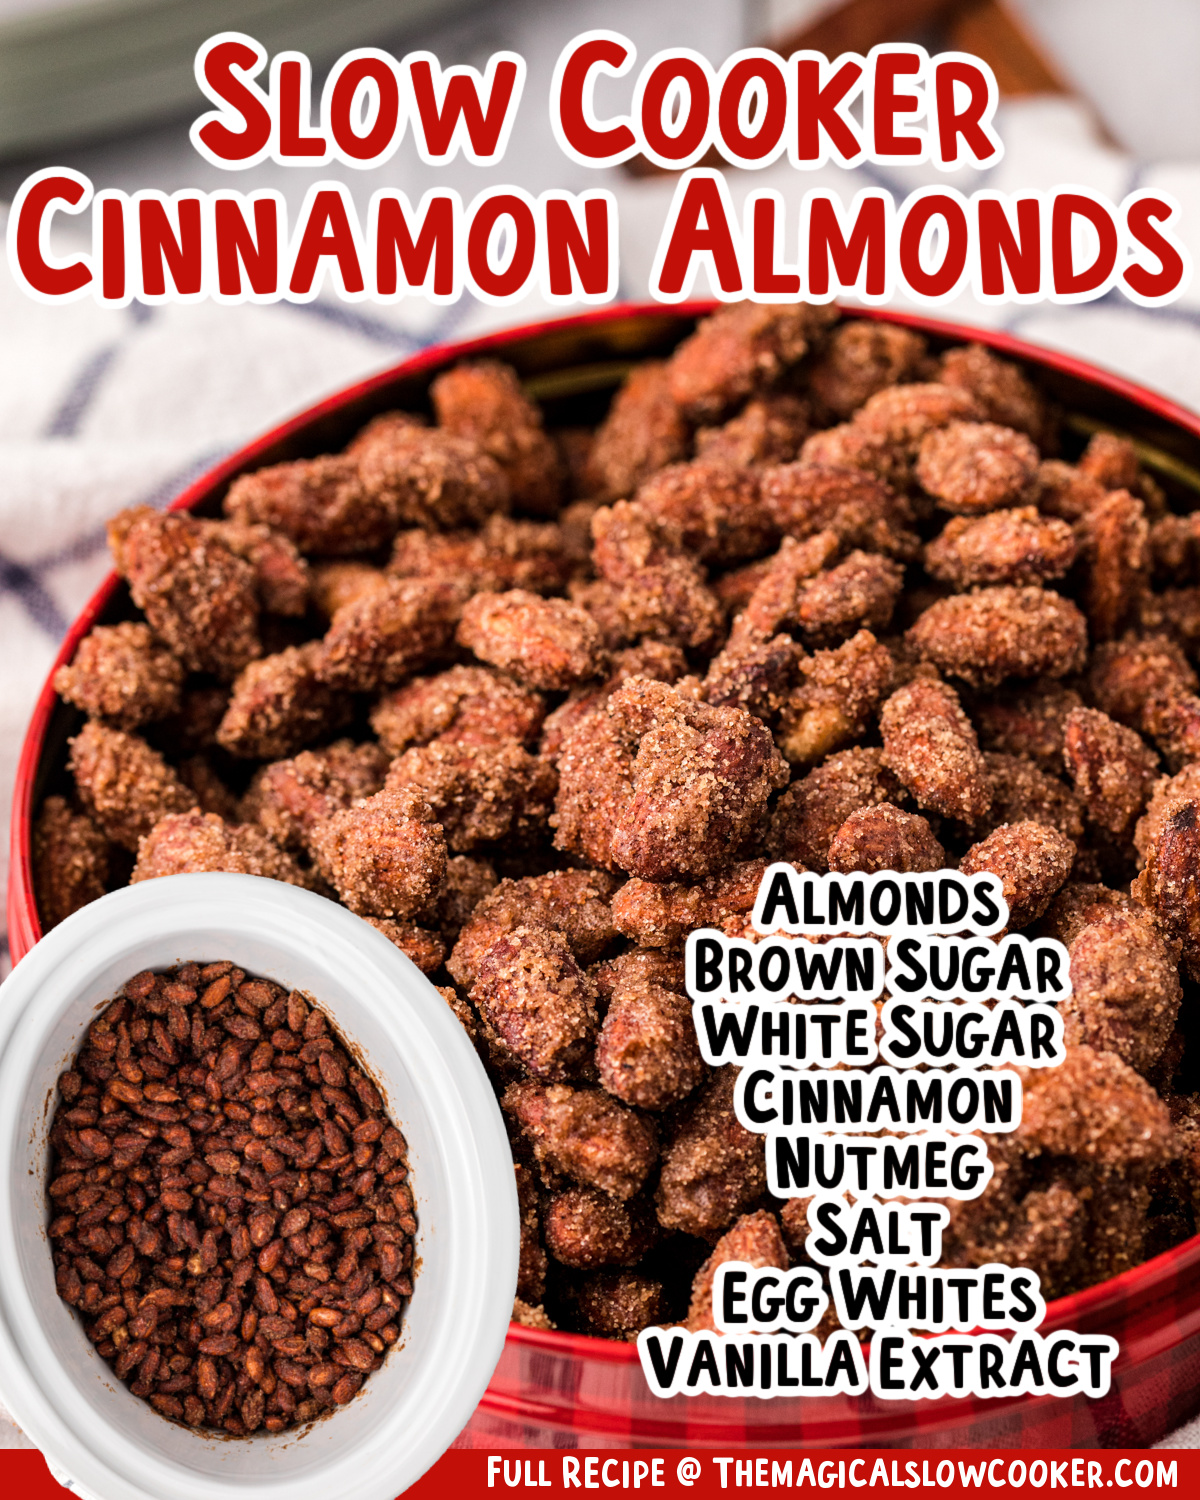 images of cinnamon almonds with text of ingredients for facebook.